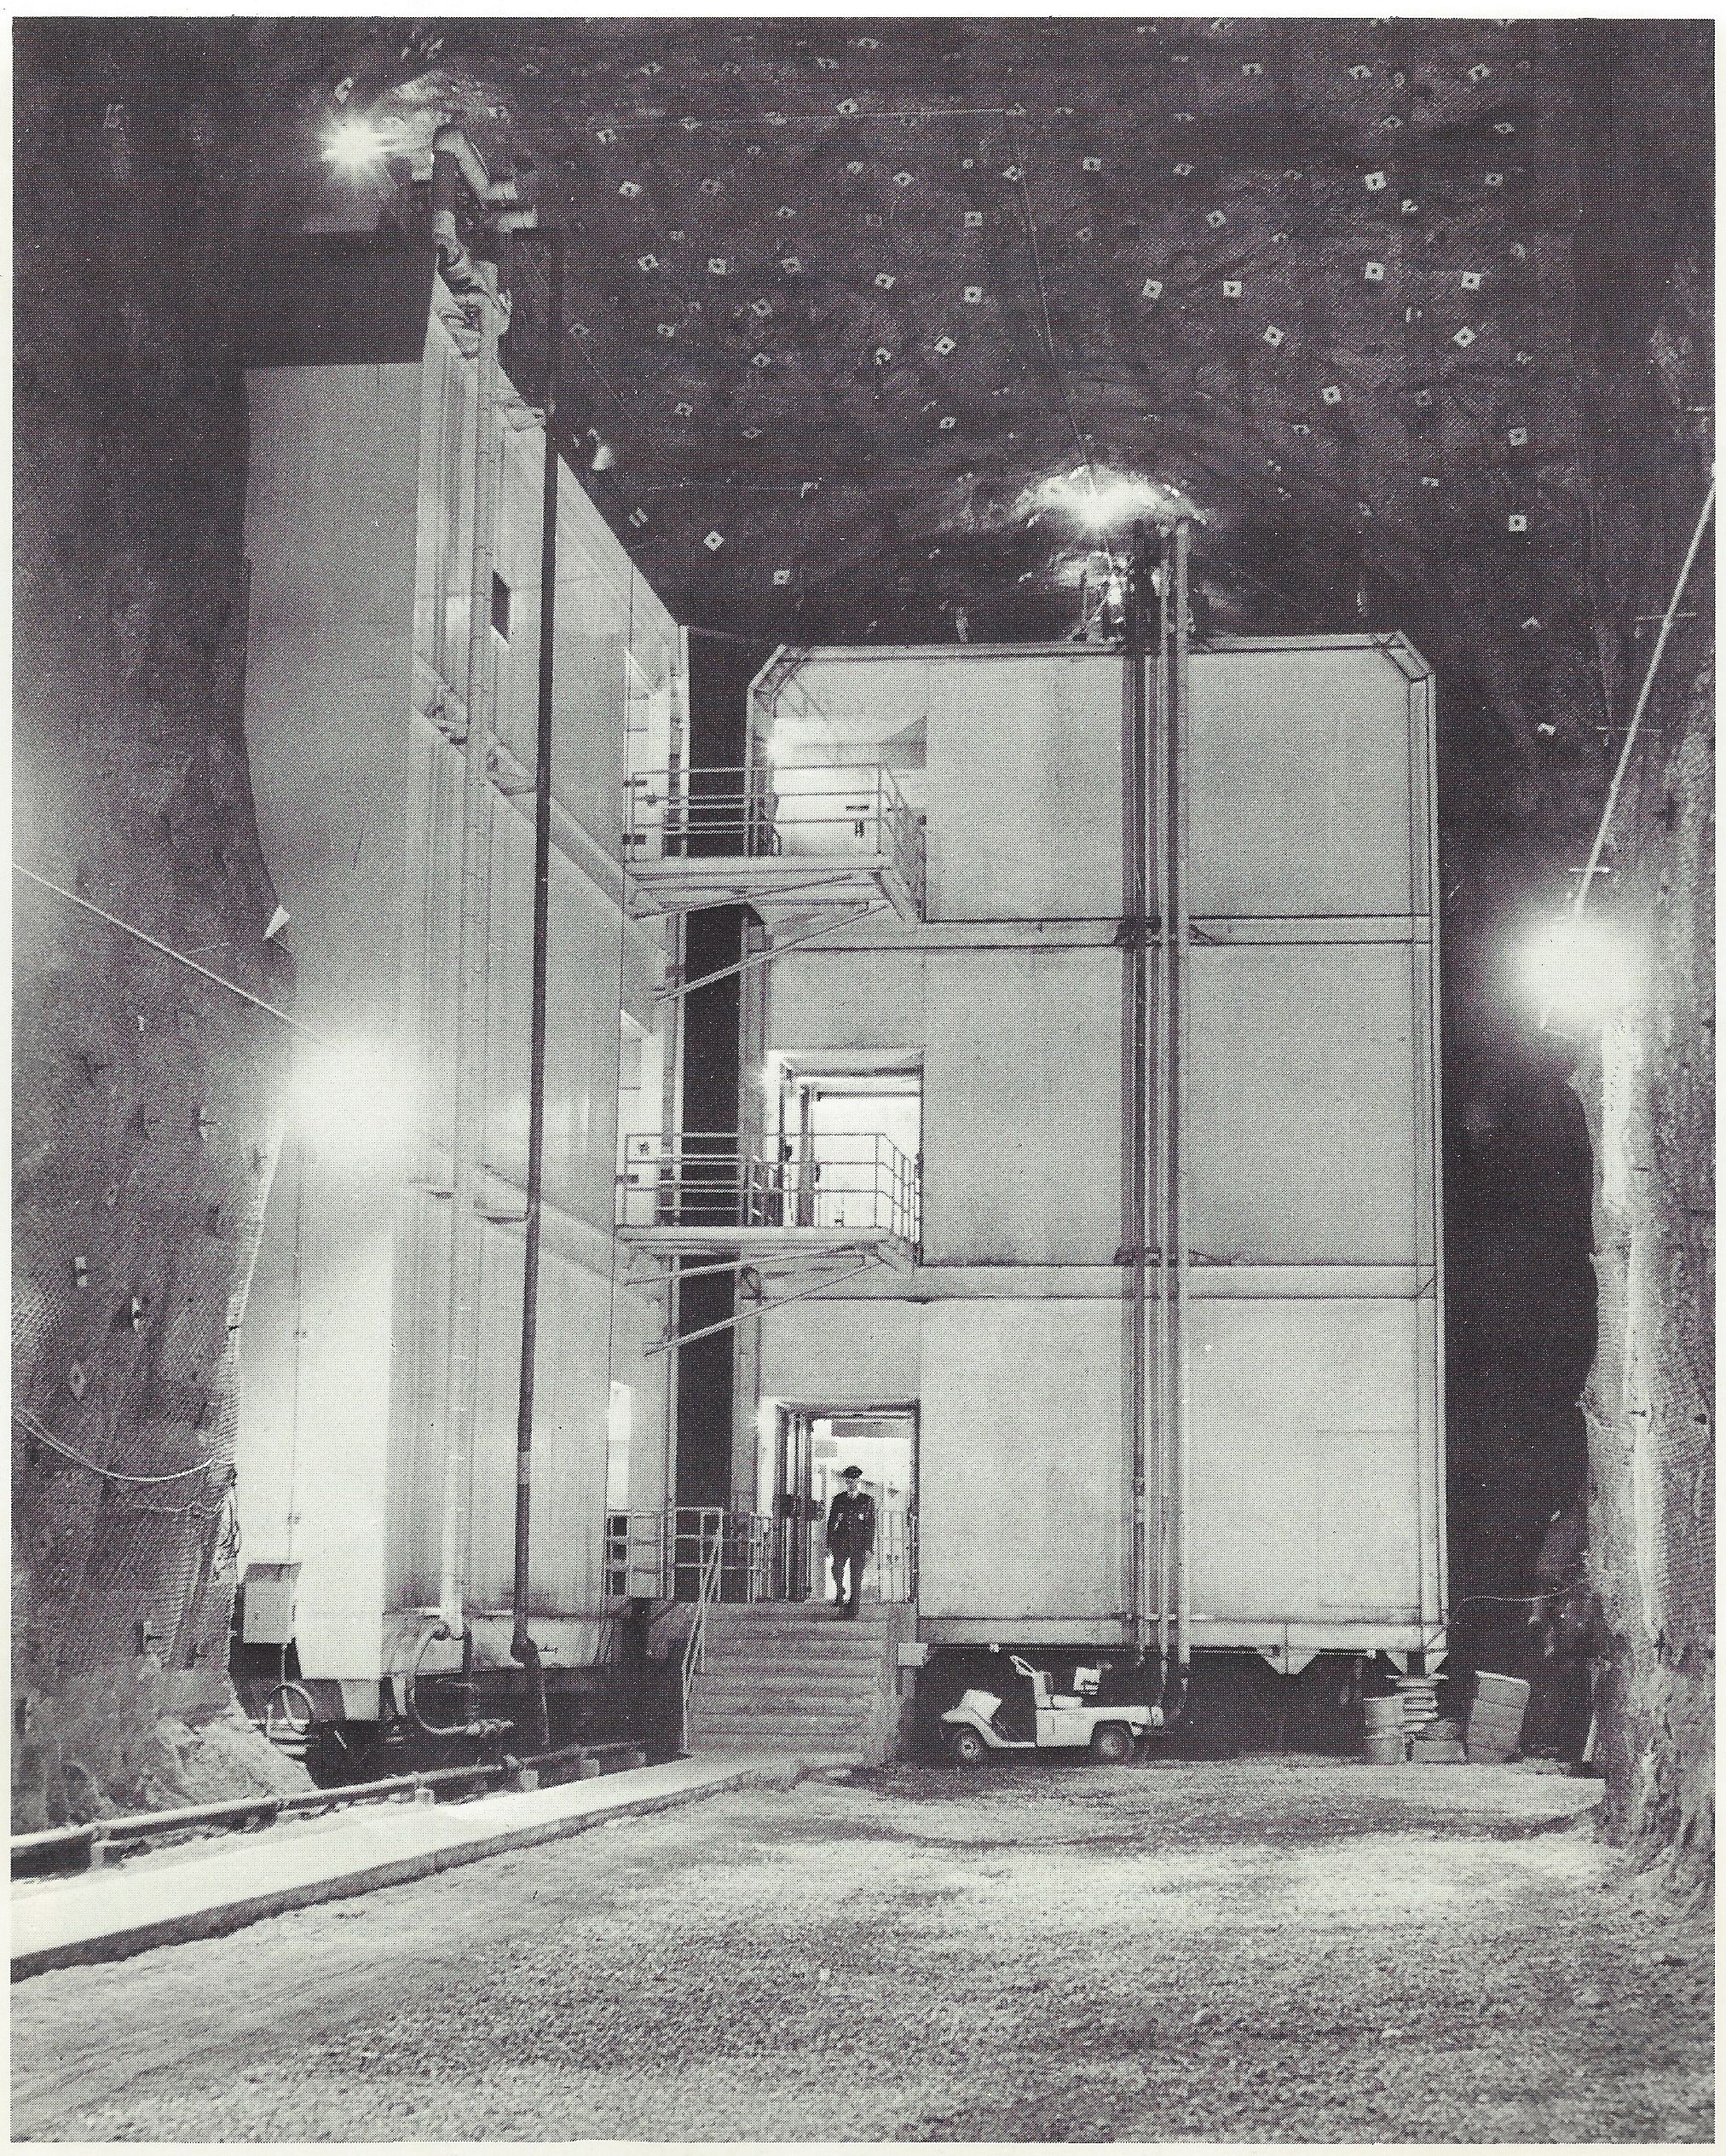  Caption: "These are two of the eleven buildings in the NORAD complex. While it possible to pass from one building to another through vestibules, the structures do not touch one another, nor do they touch the ceilings or walls of their granite cave. 